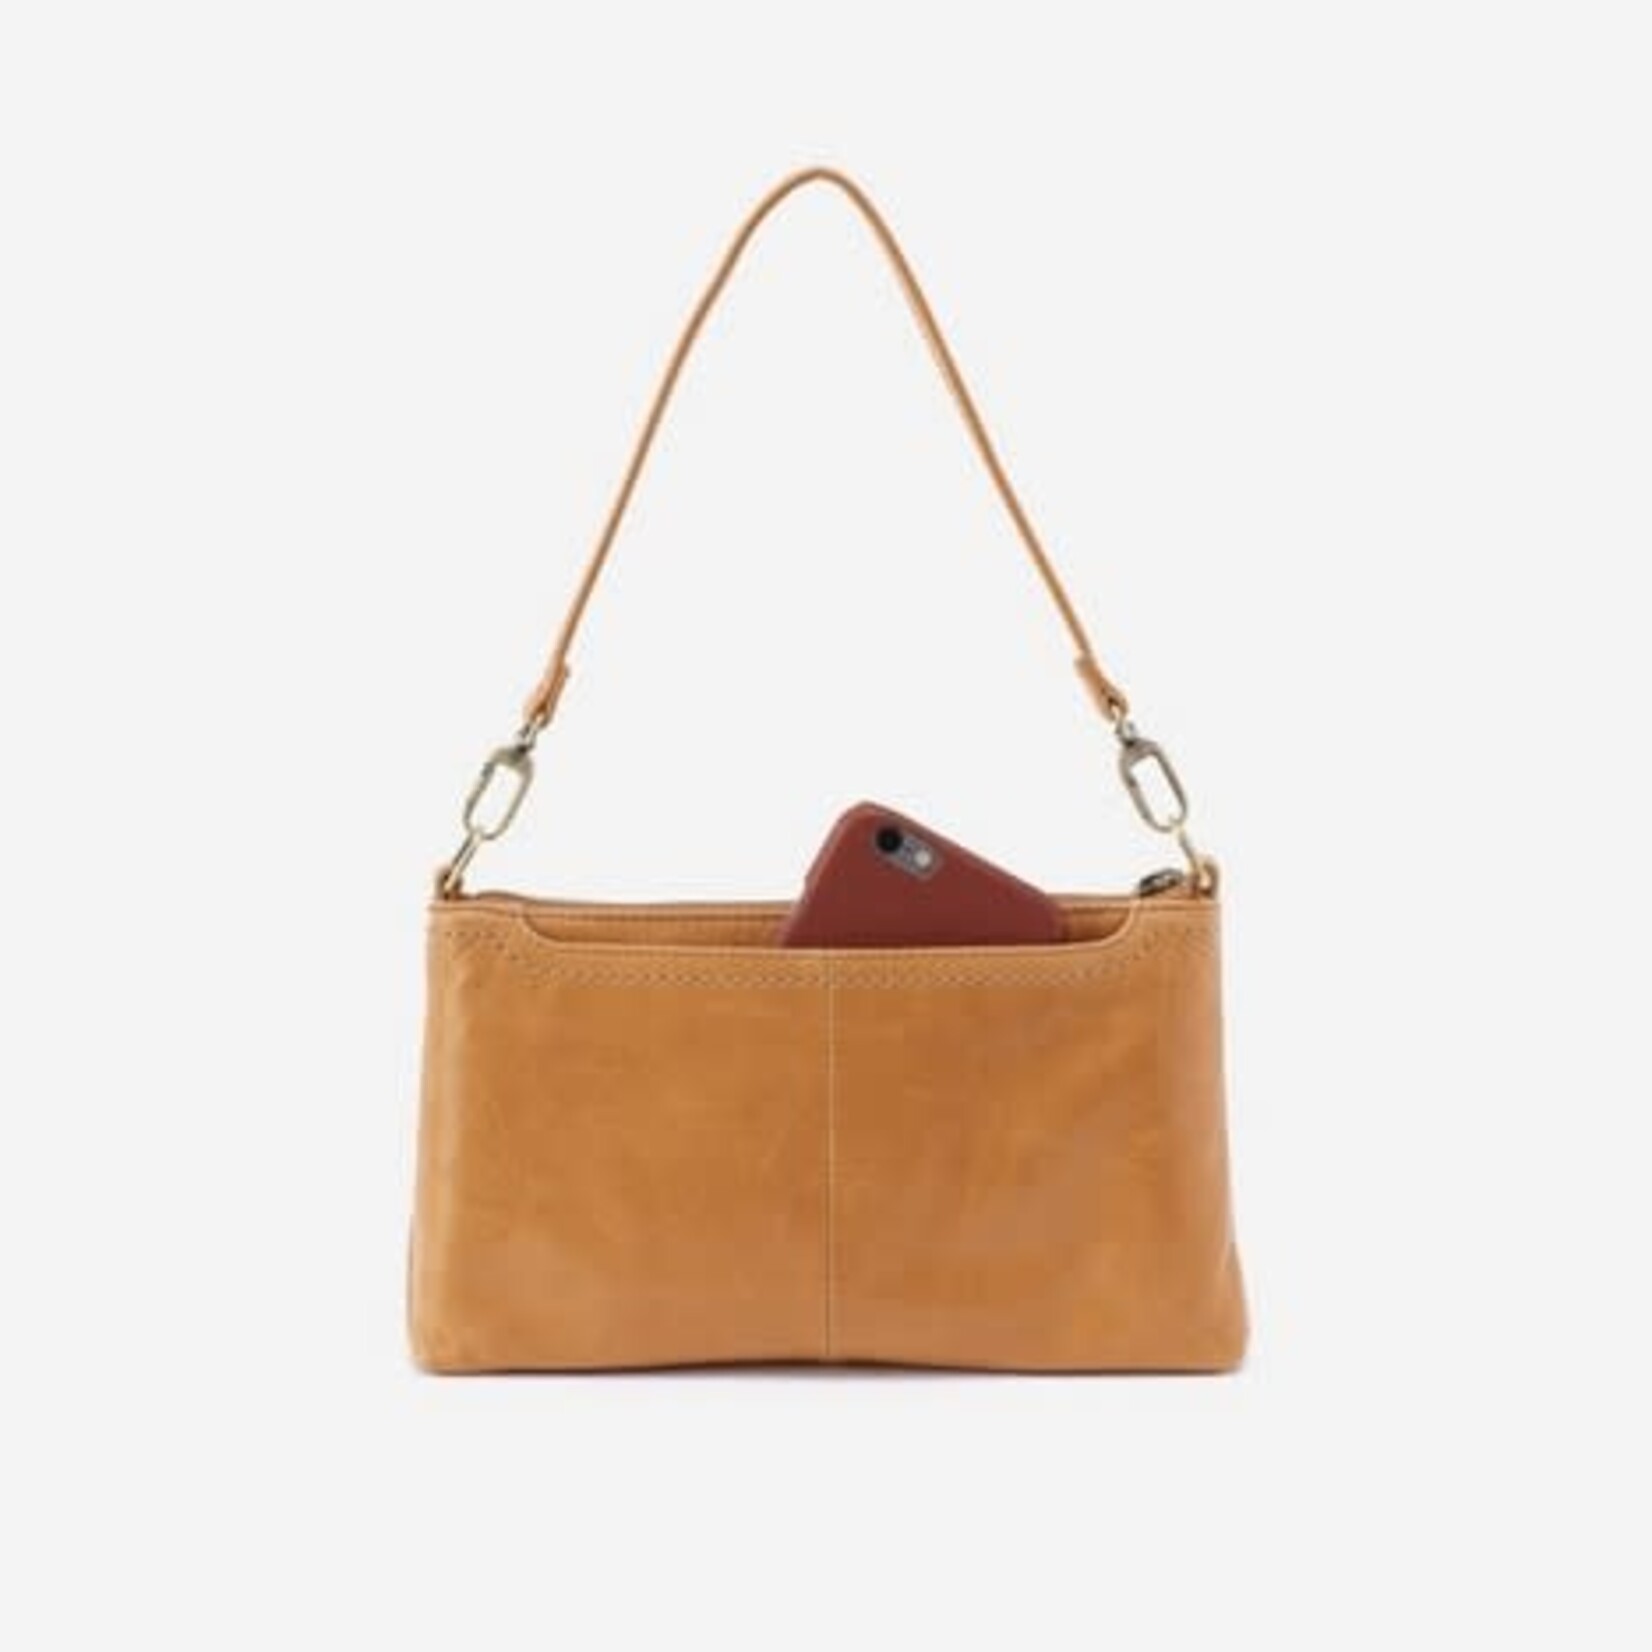 HOBO Darcy Polished Leather Crossbody in Natural